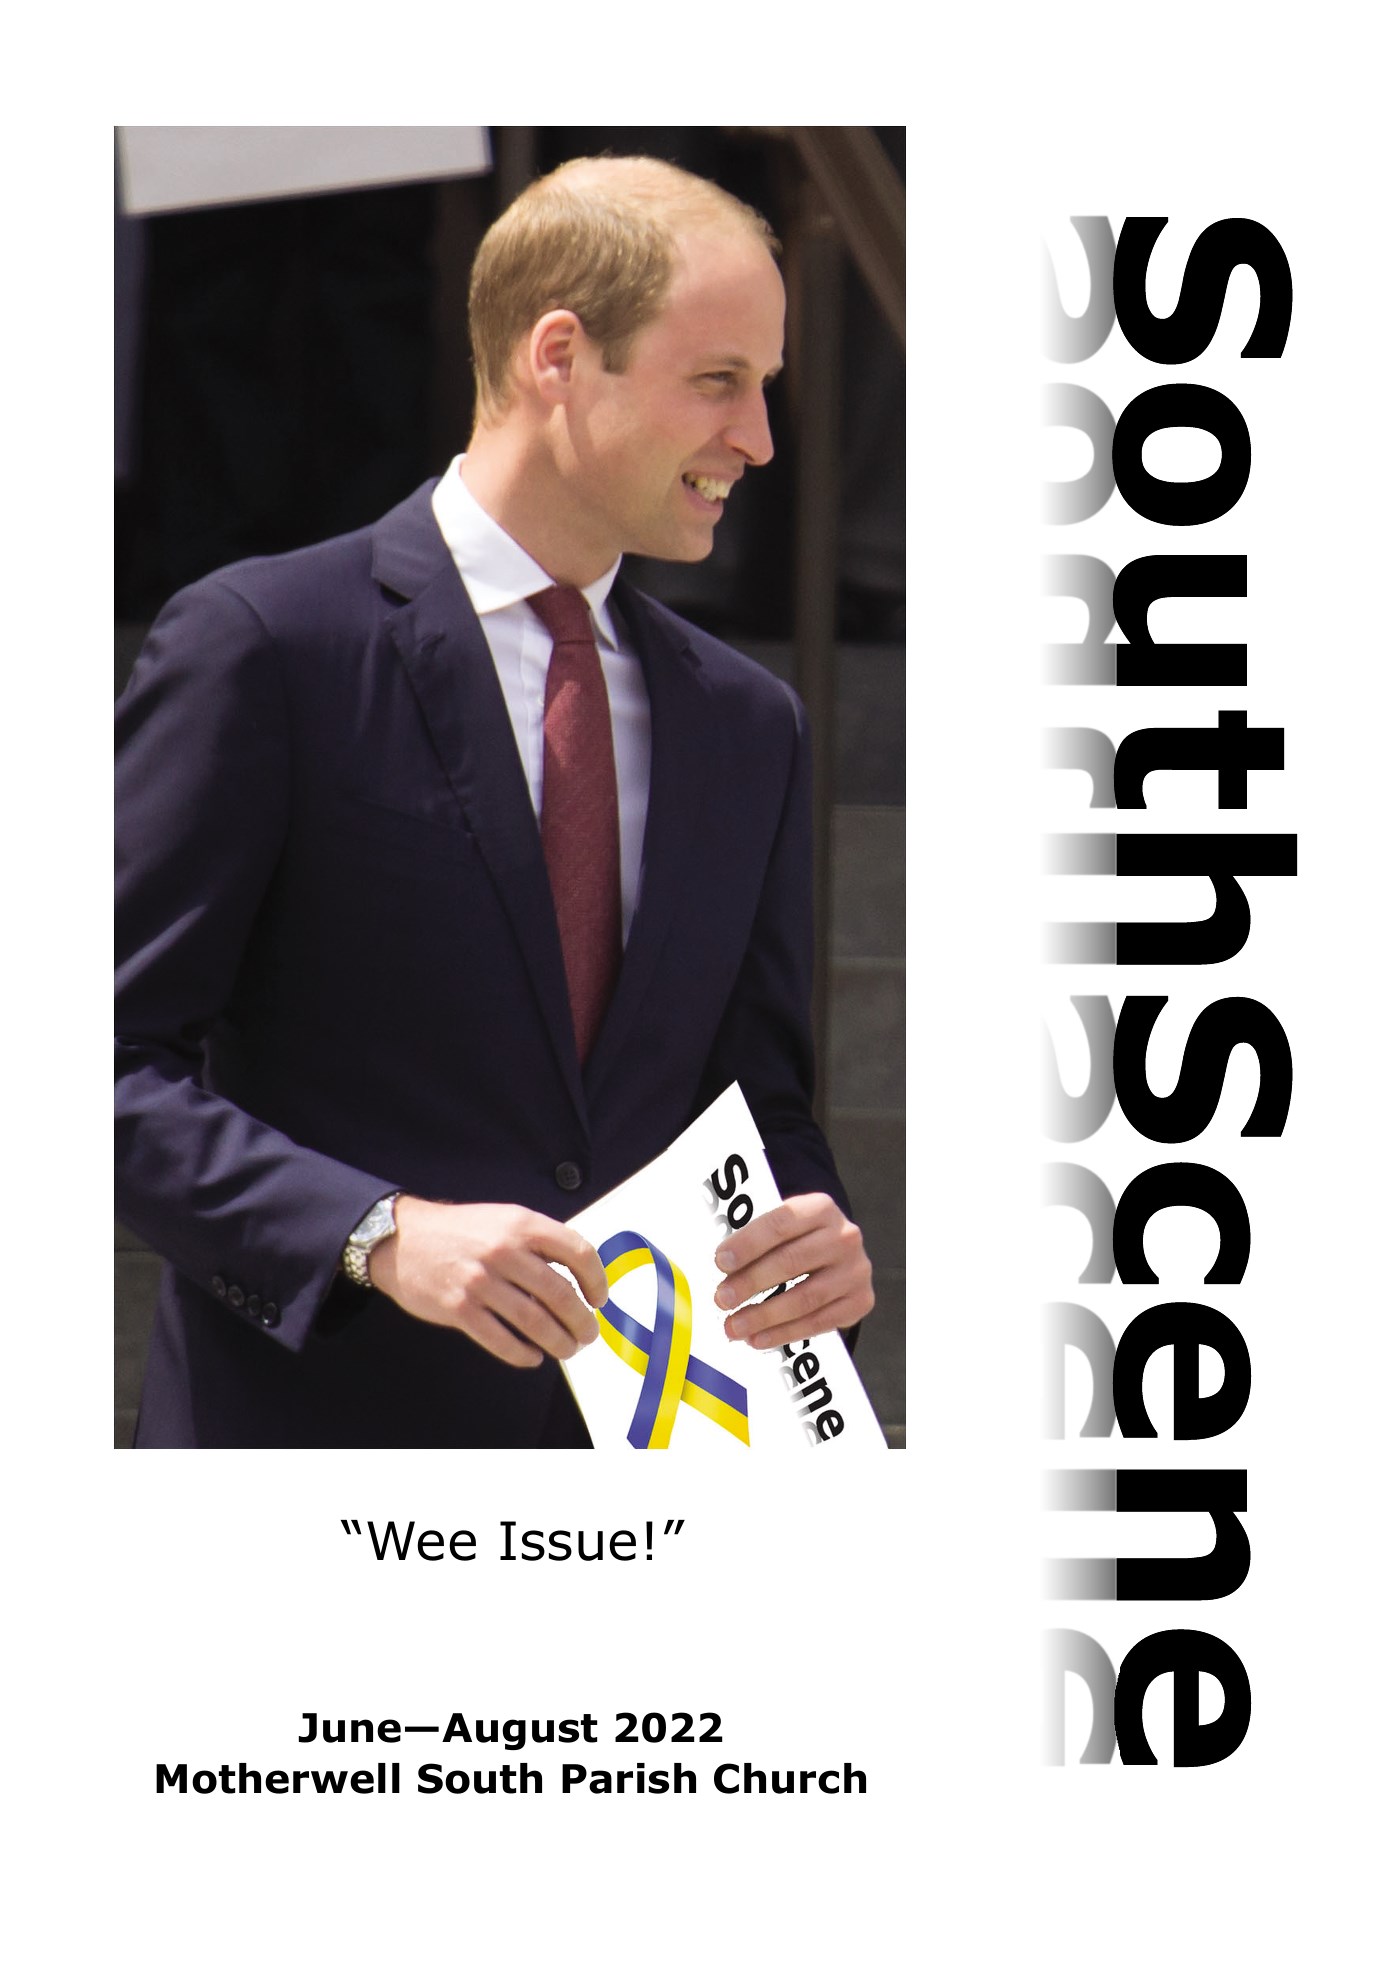 SouthScene: Wee Issue